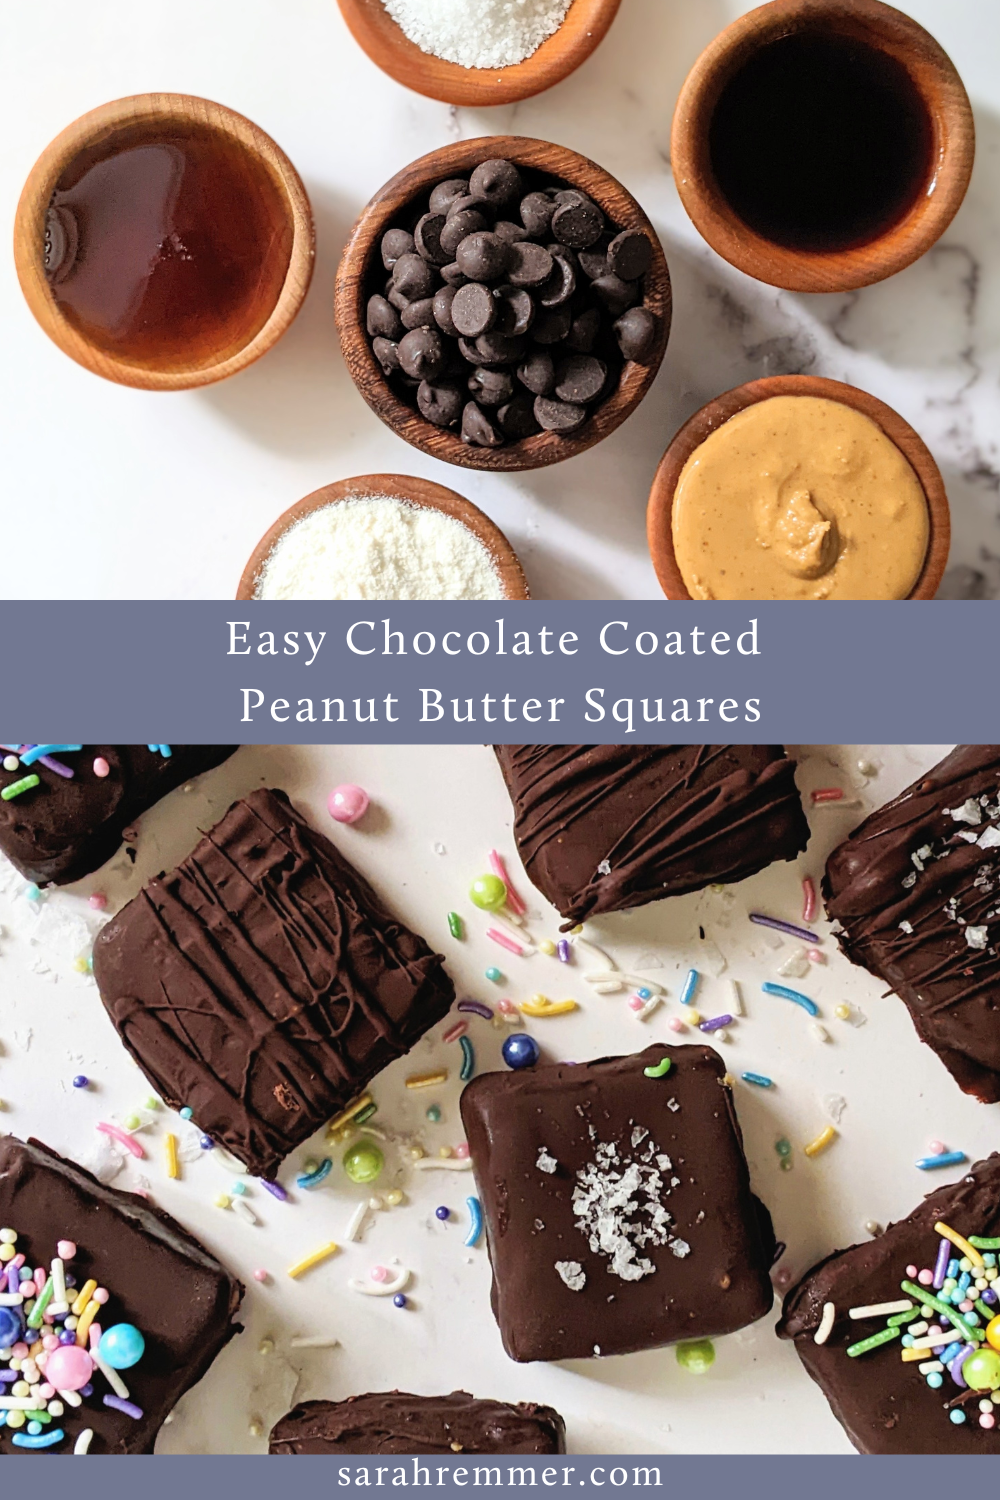 These Easy Chocolate Coated Peanut Butter Squares are made with only 5 ingredients (plus a little sea salt) and are so simple that your kids can make them?